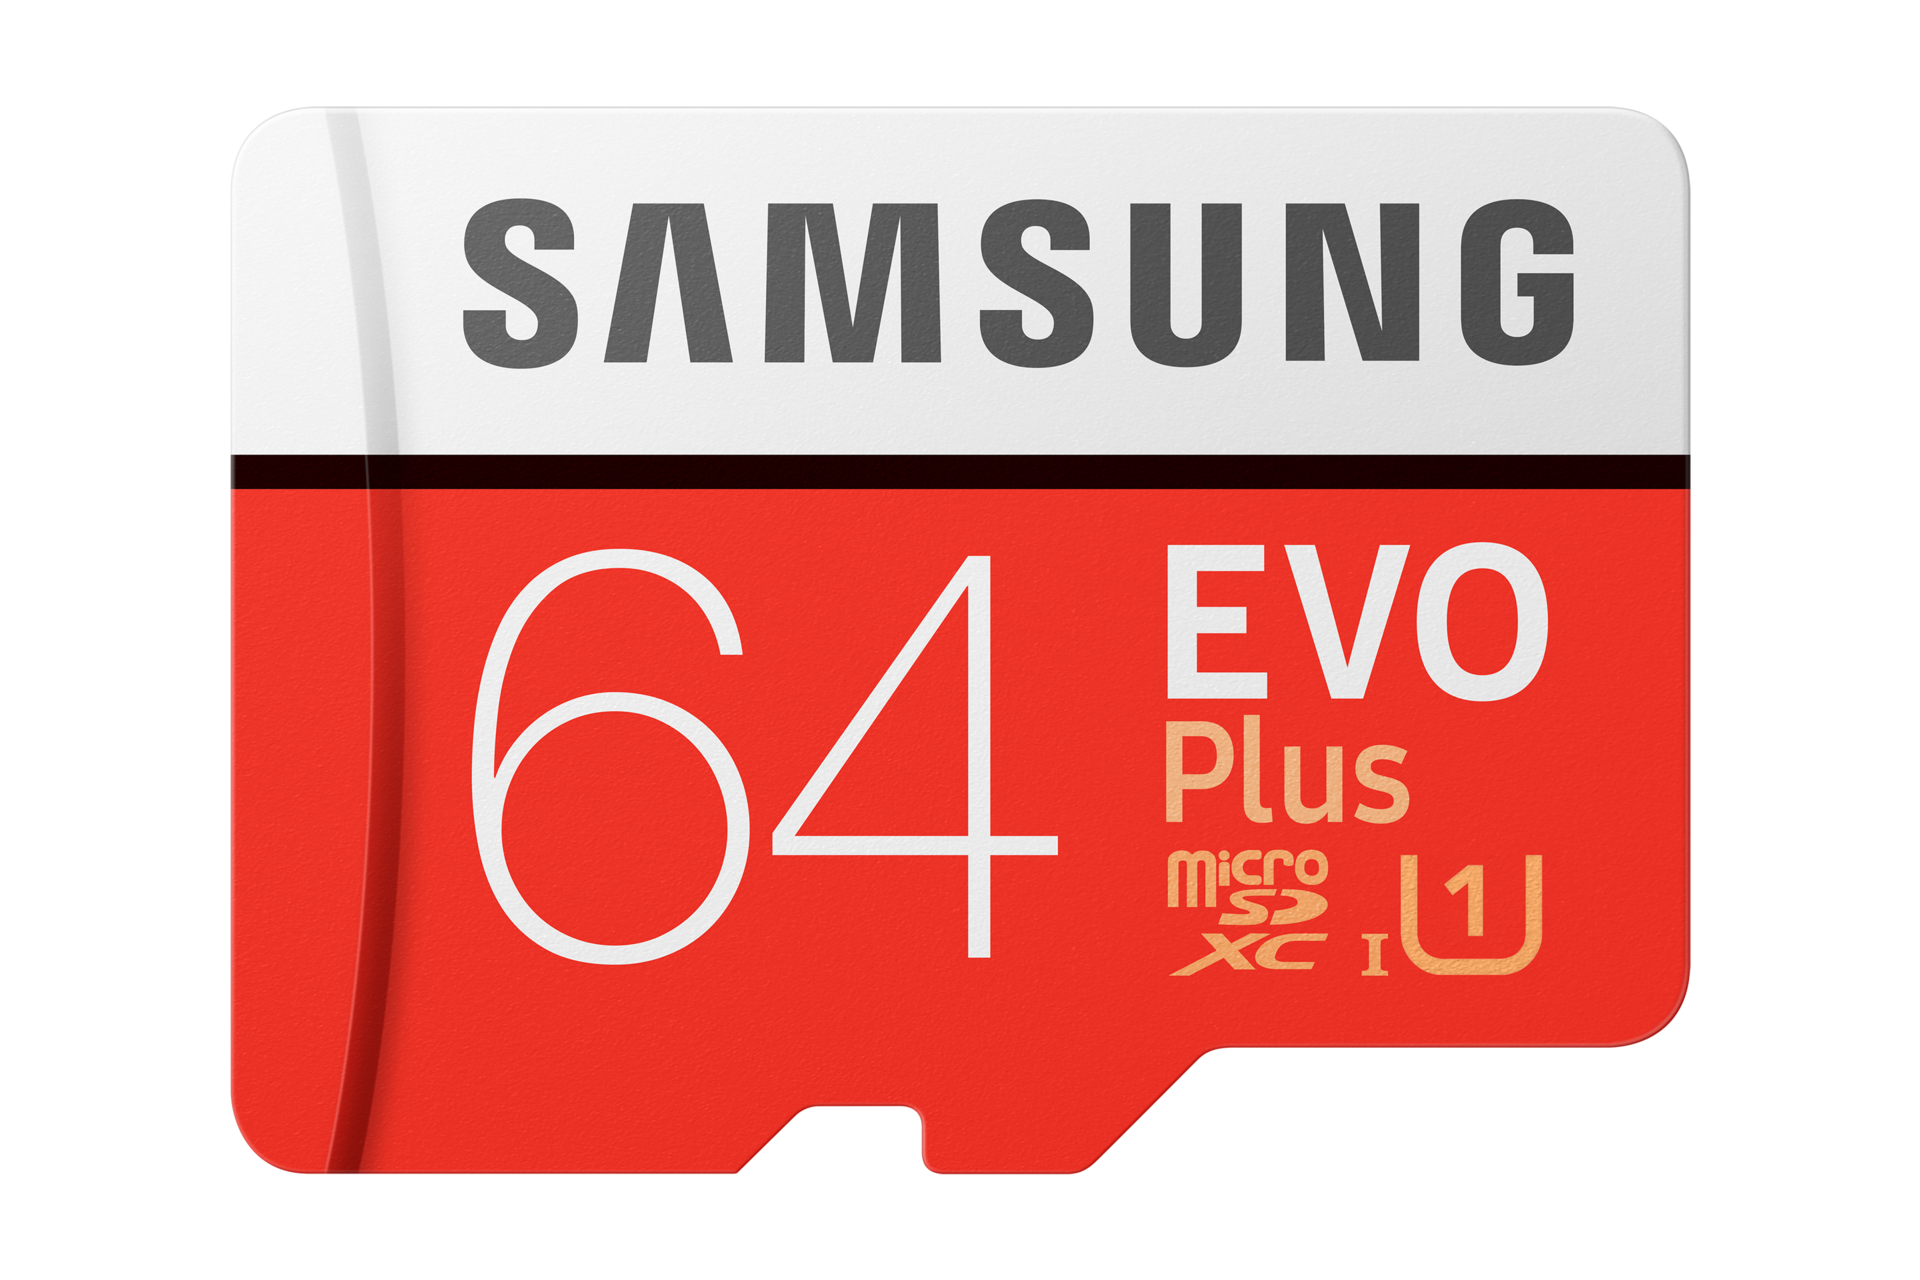 Front View of the Samsung 64GB microSD Card (EVO+)